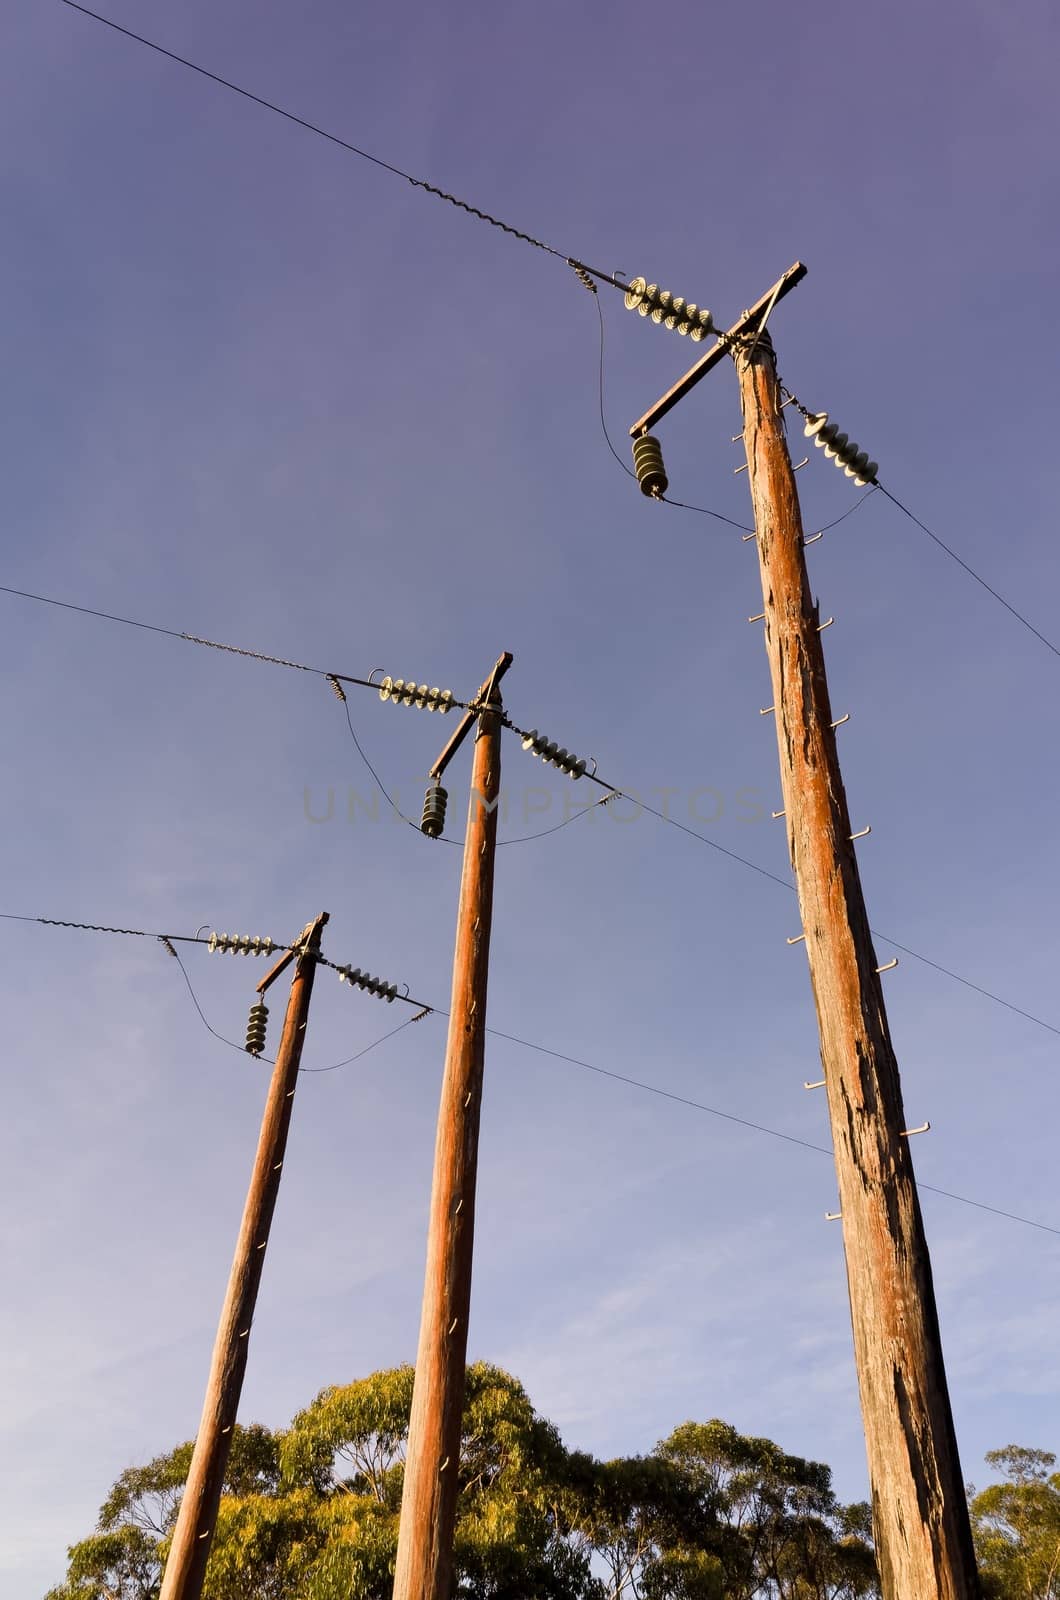 Photograph of electric poles on a sunny day in the Australian bush